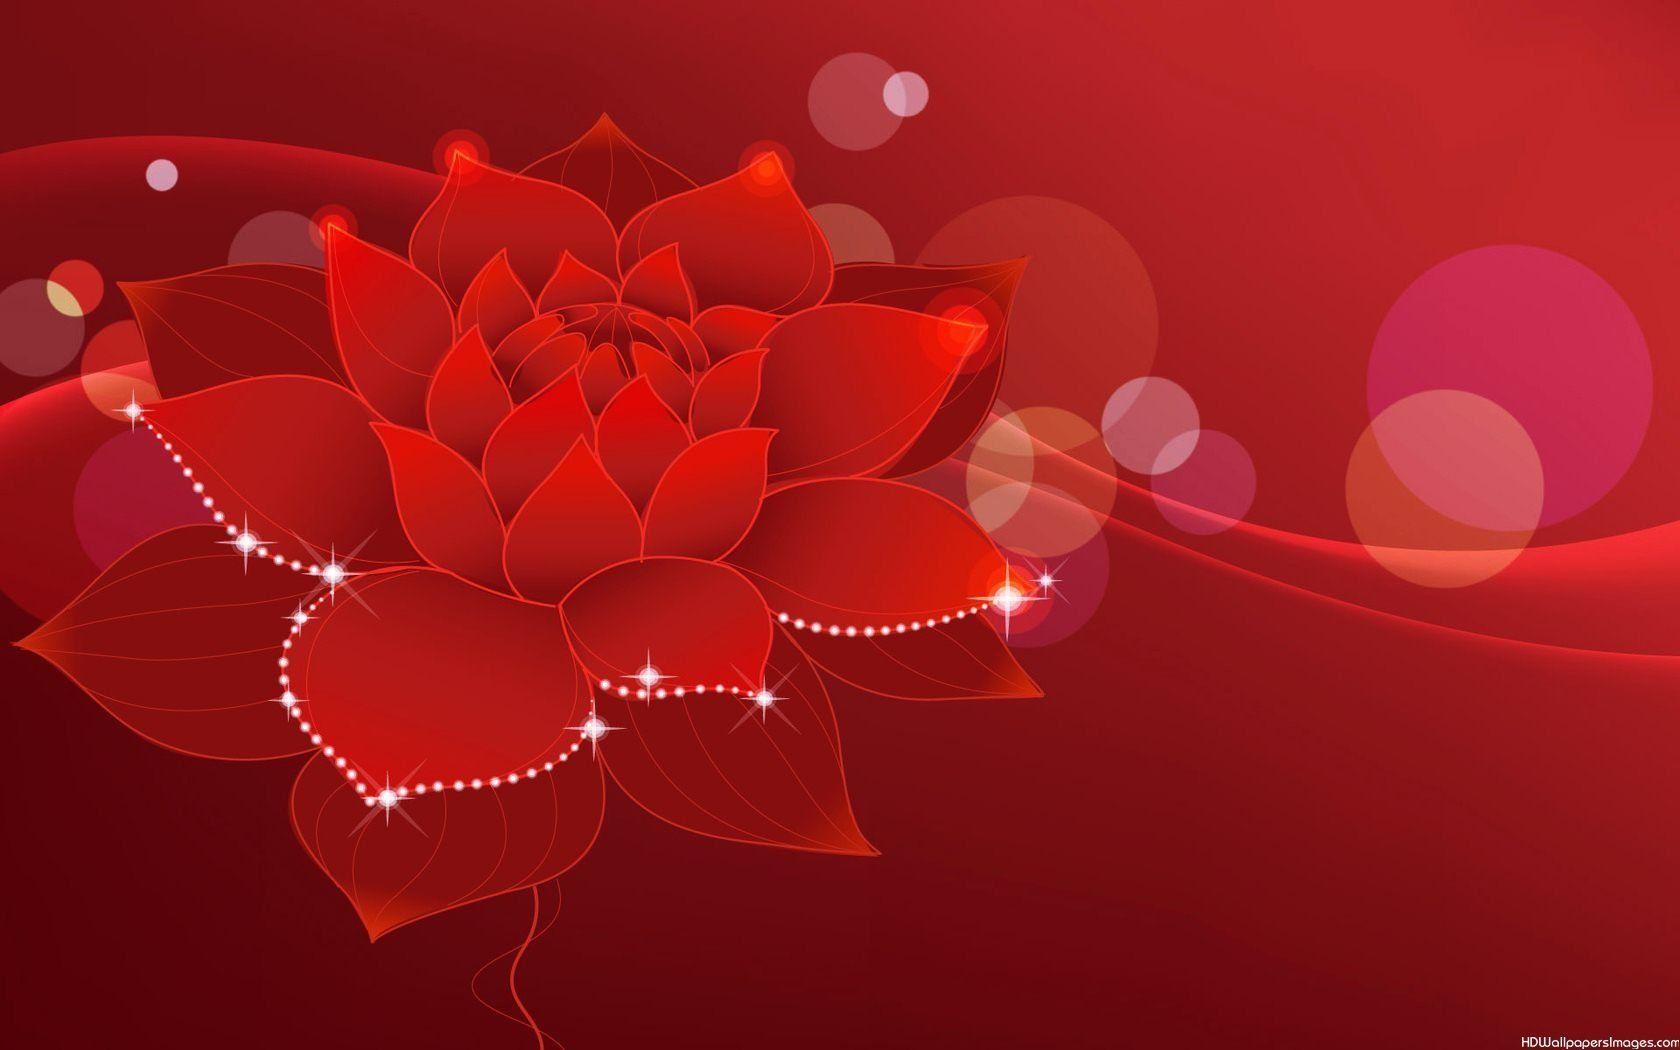 Red Flower Vector Background Image. HD Wallpaper Image